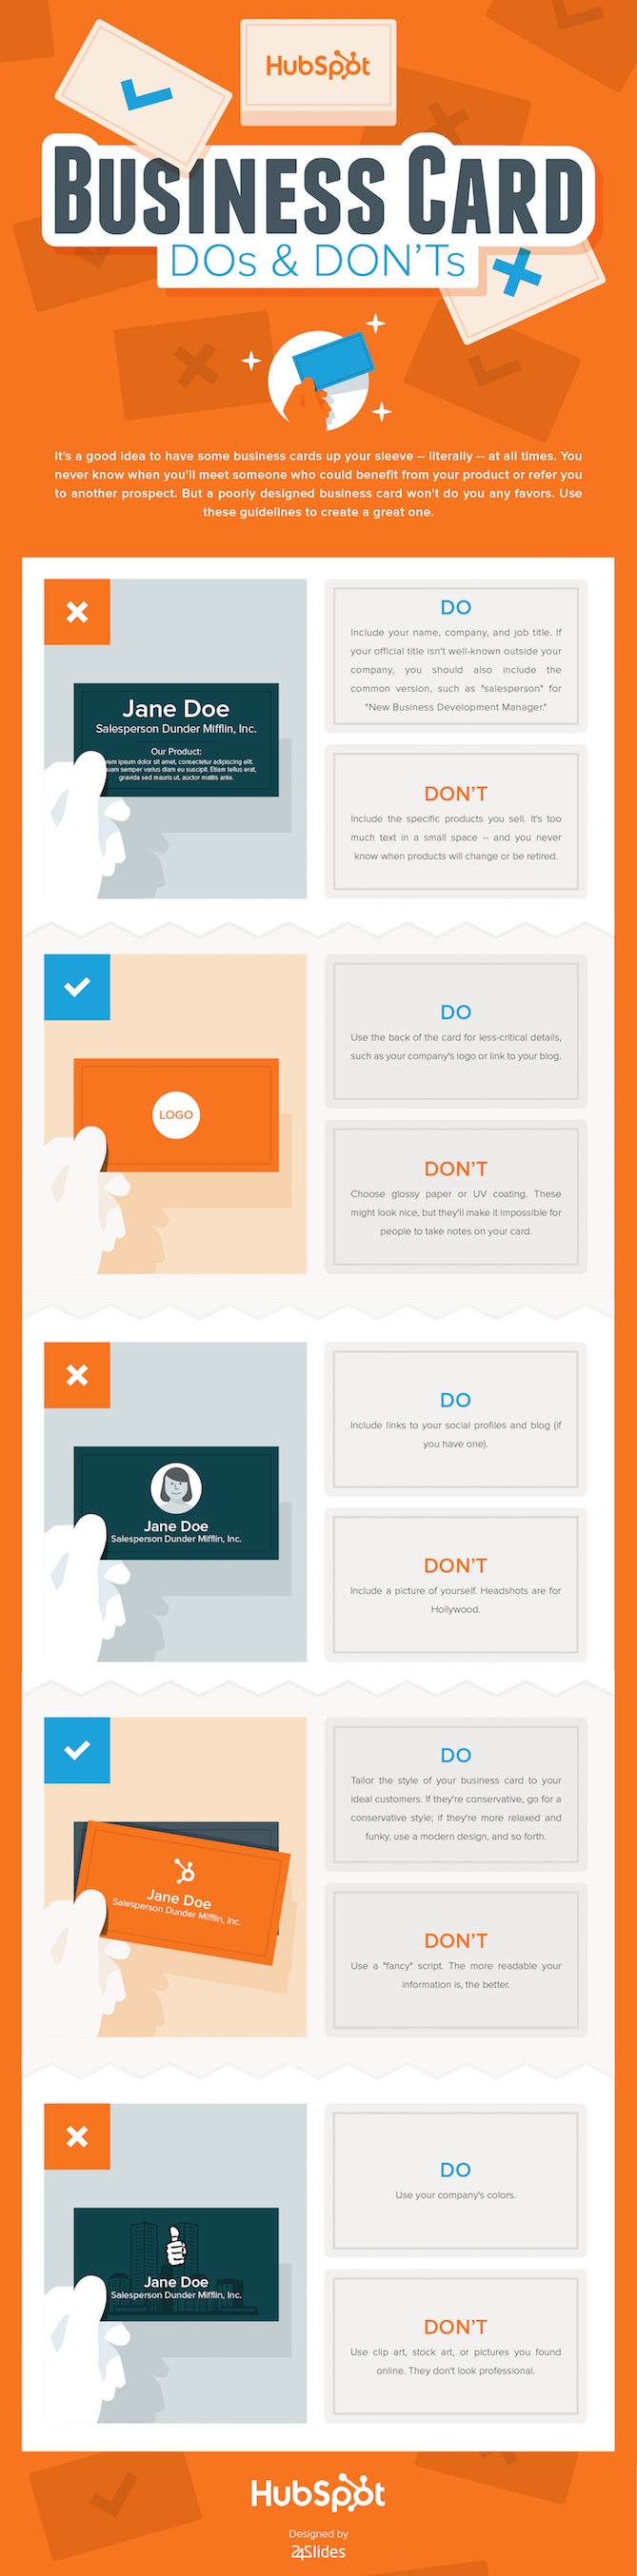 sales_business_card_dos_donts_infographic.jpg